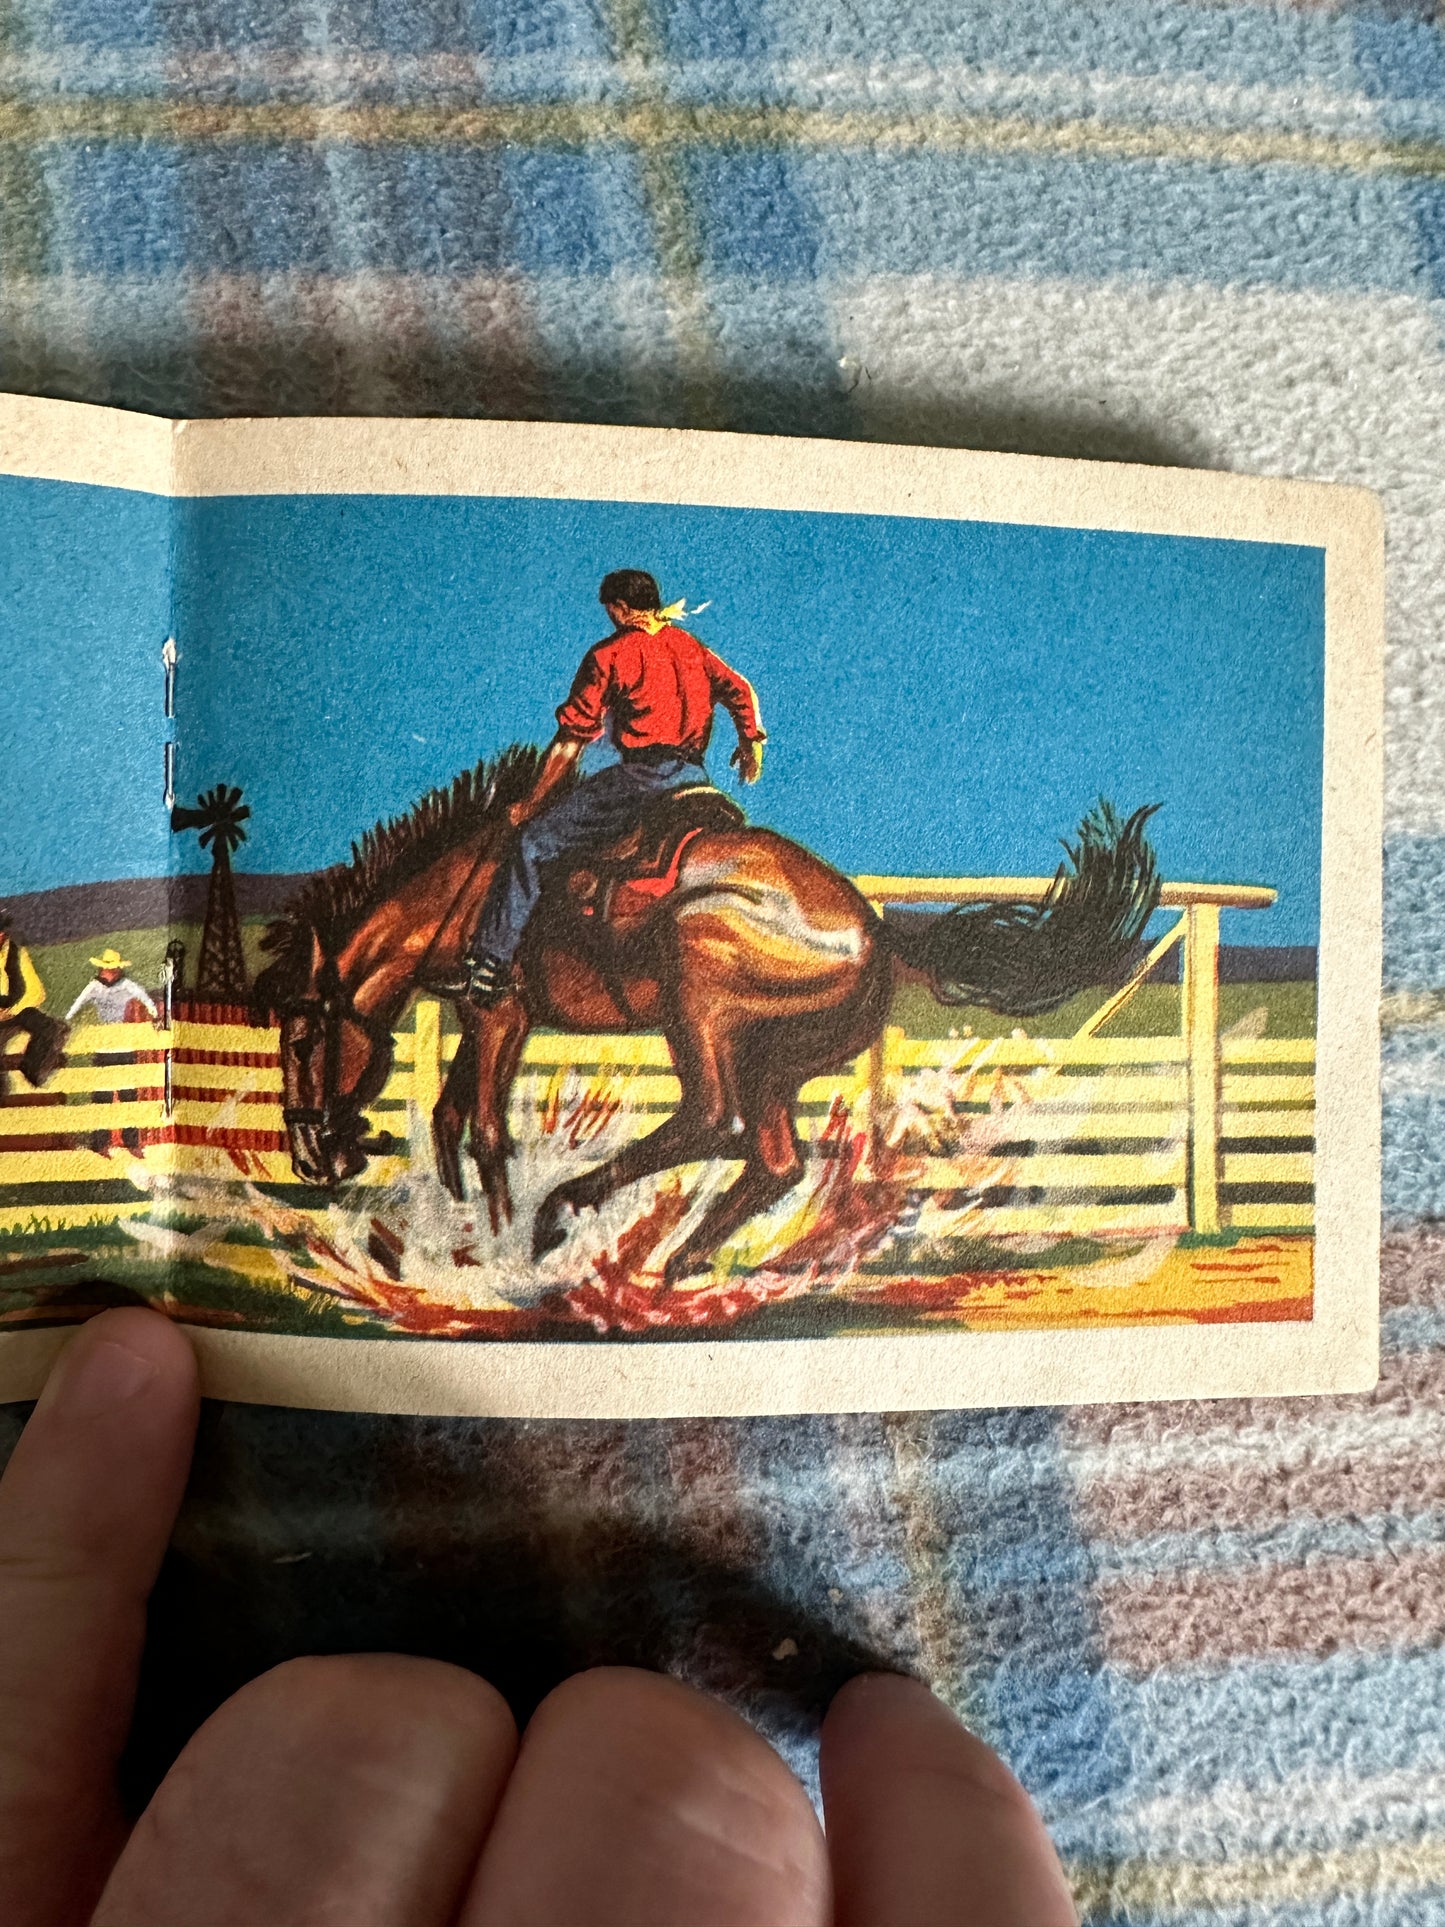 1950’s Rodeo Ride (No246) Made In England